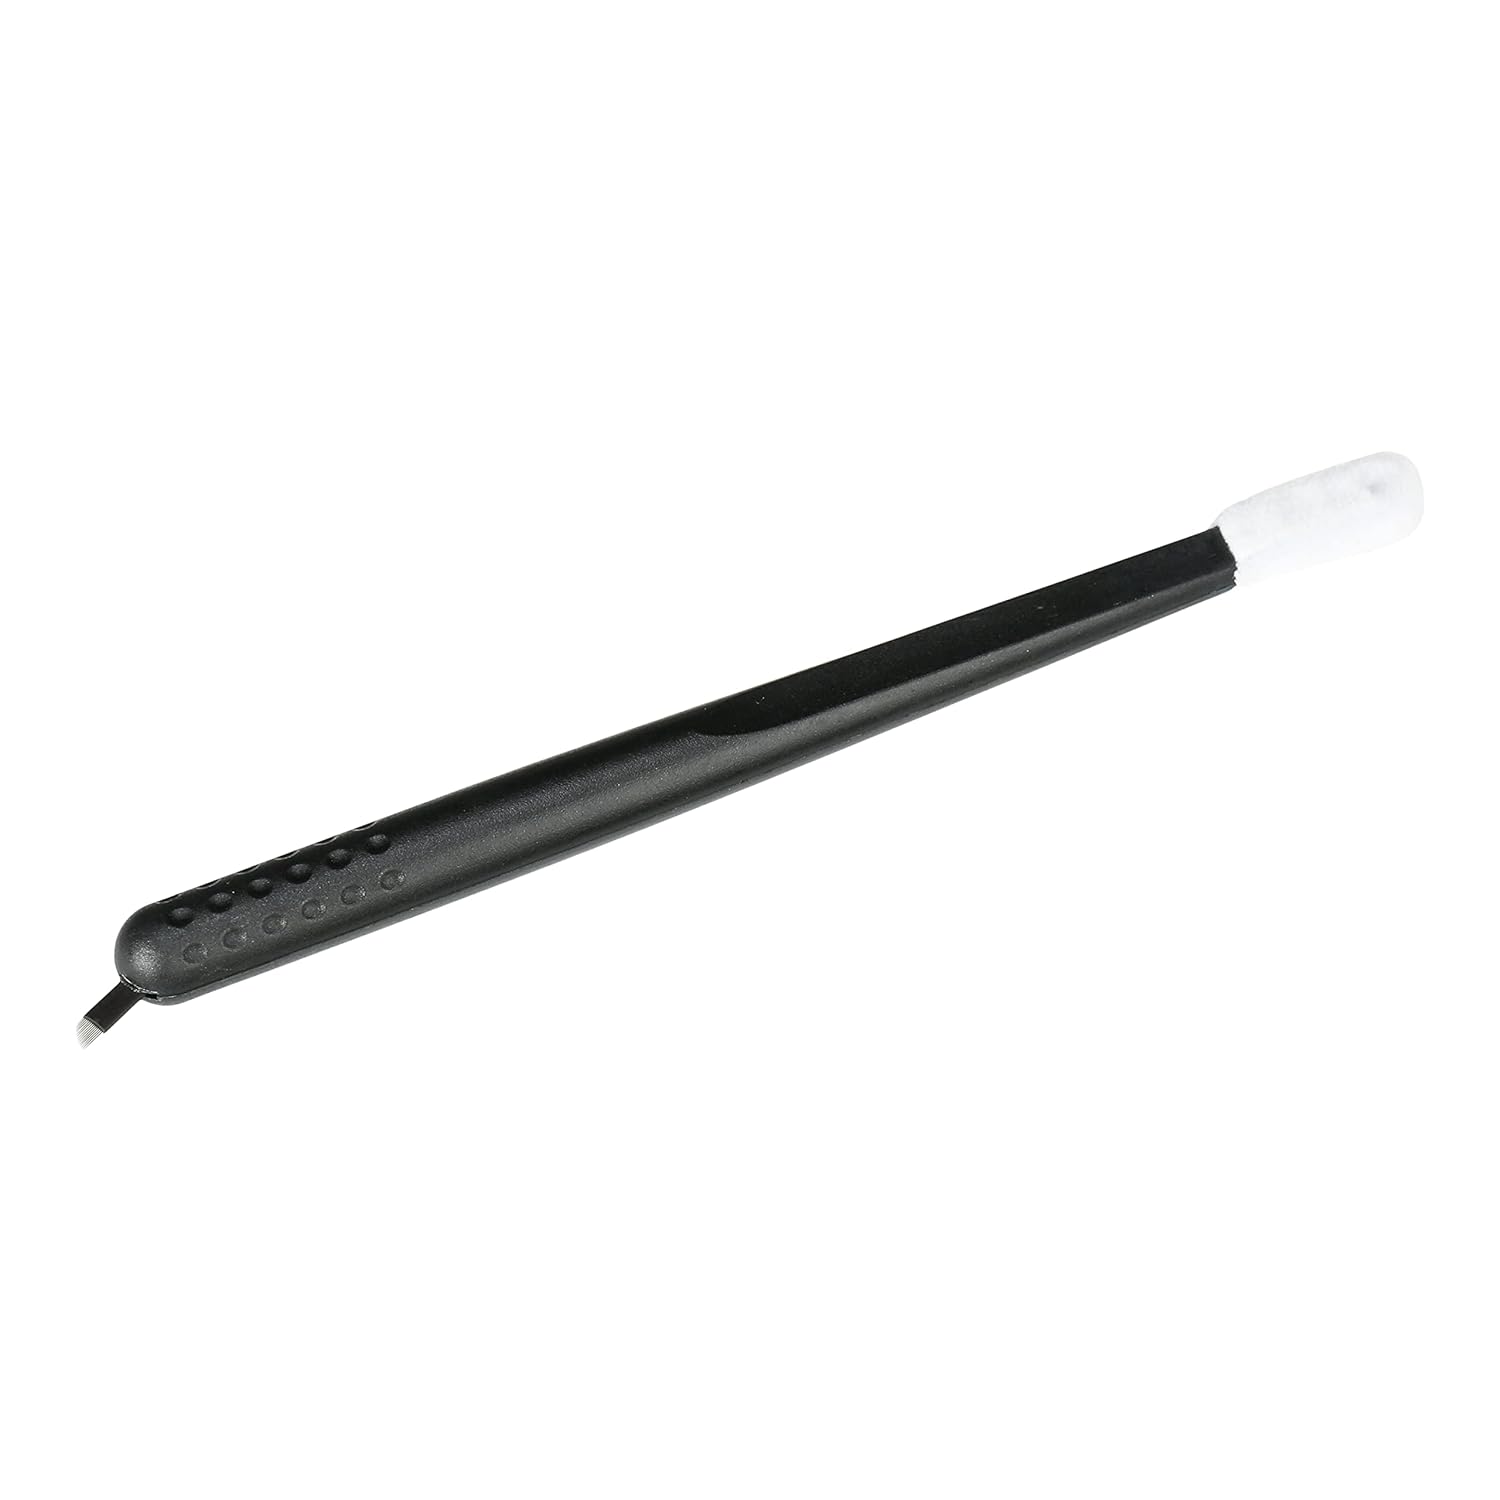 mellie microblading eccentric disposable microblading pen c14 blade 18mm review